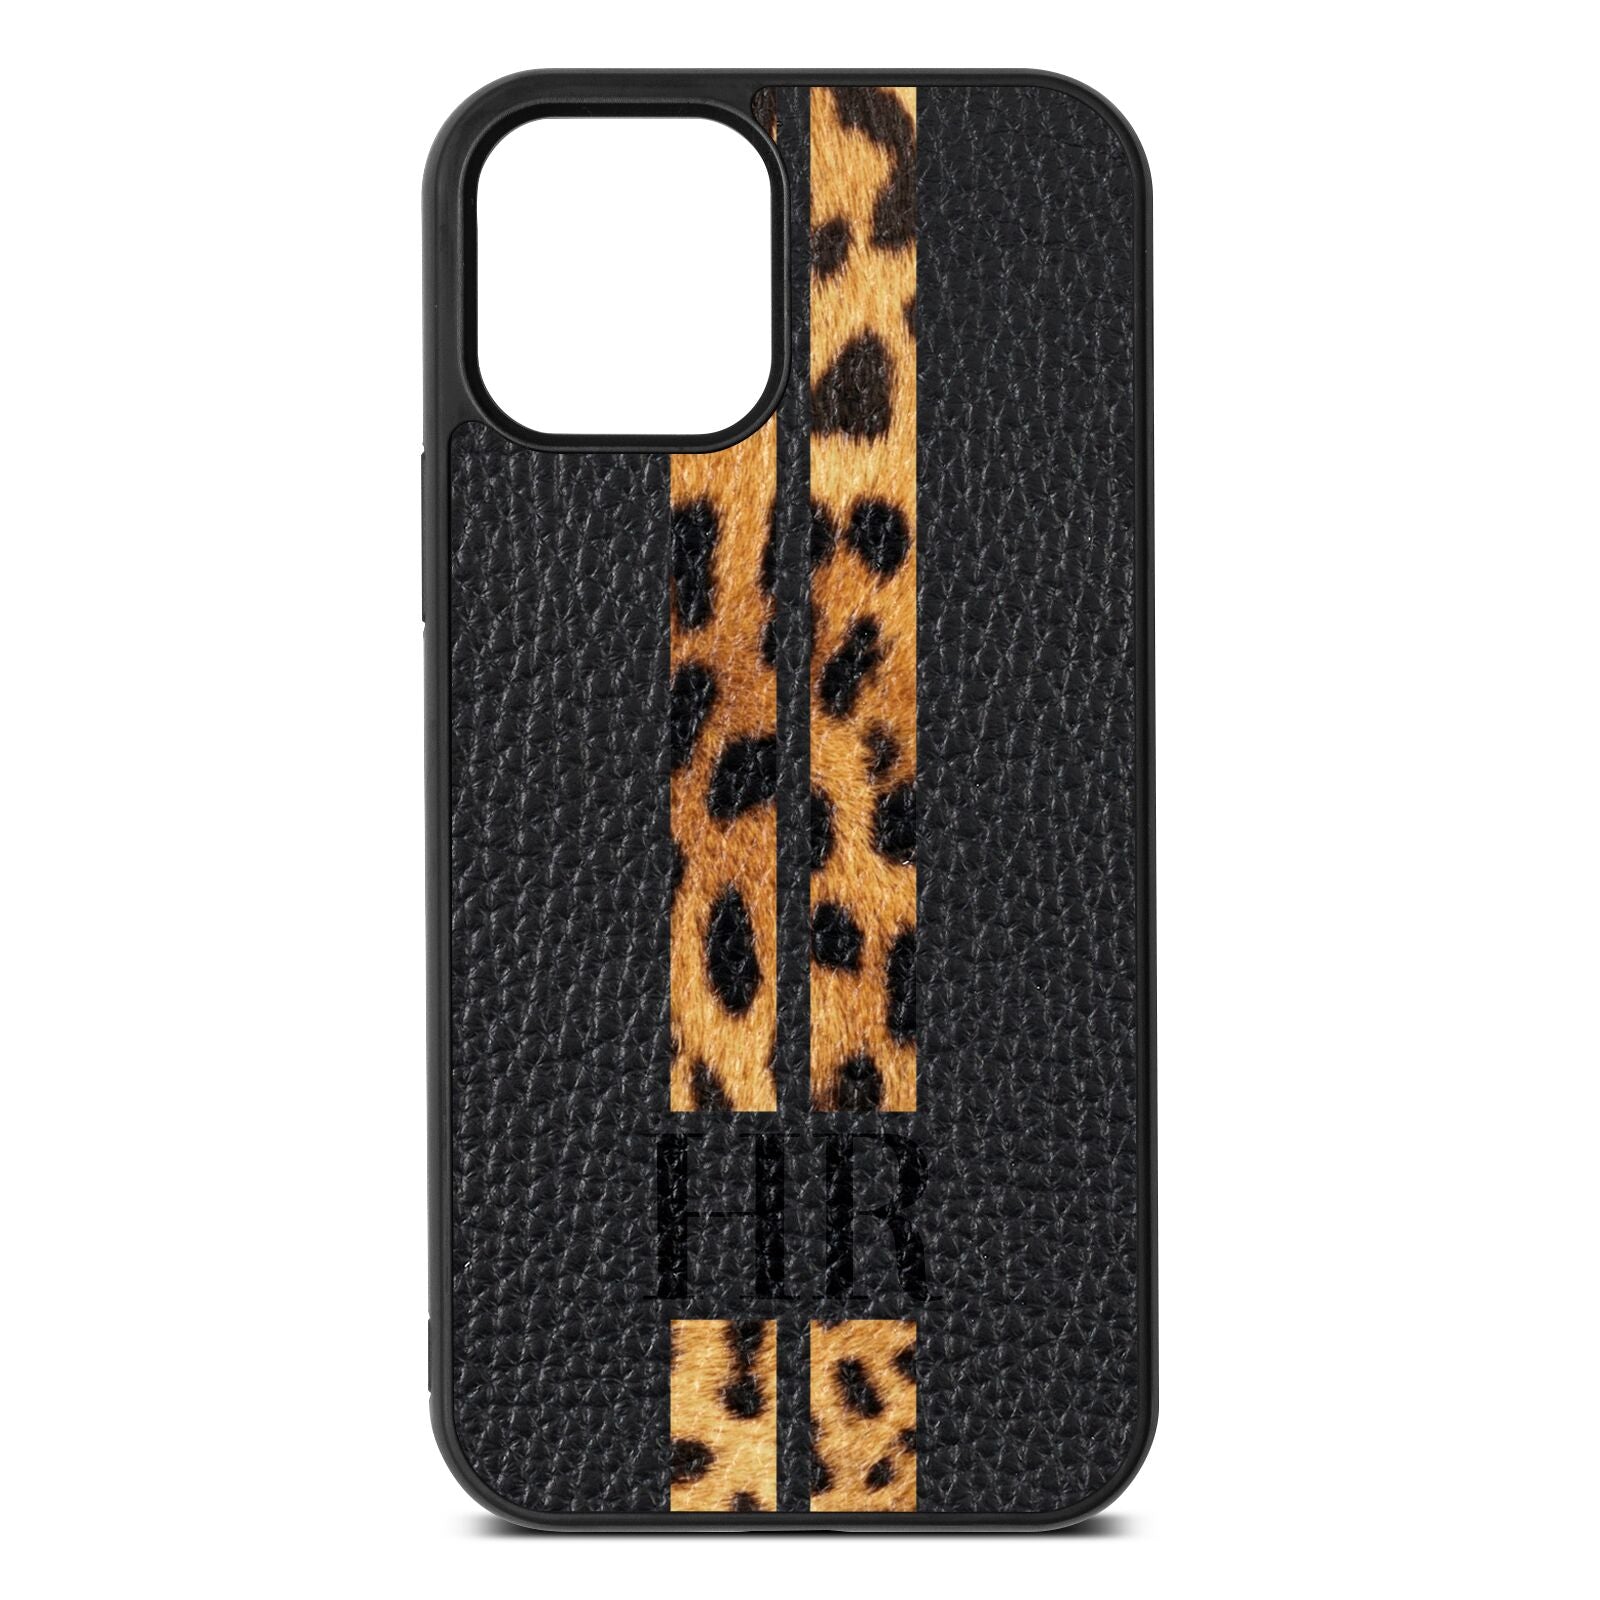 Initialled Leopard Print Stripes Black Pebble Leather iPhone 12 Case